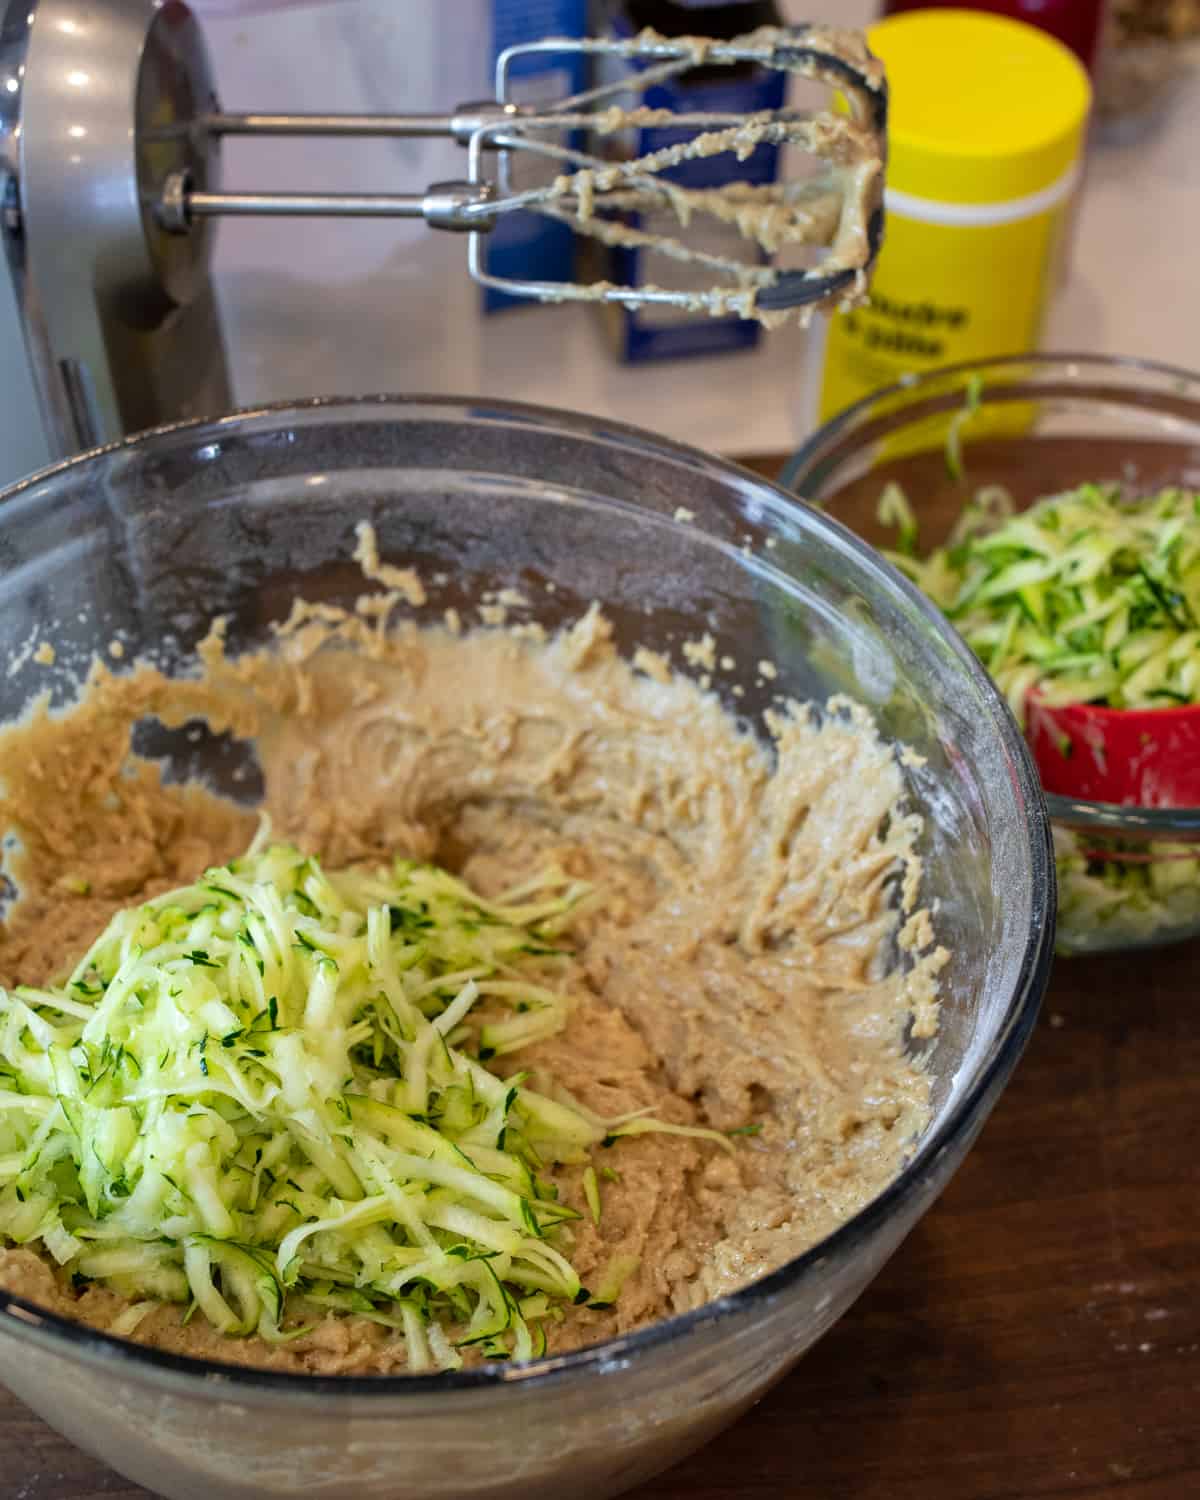 Batter in a glass bowl with a pile of grated zucchini on top.